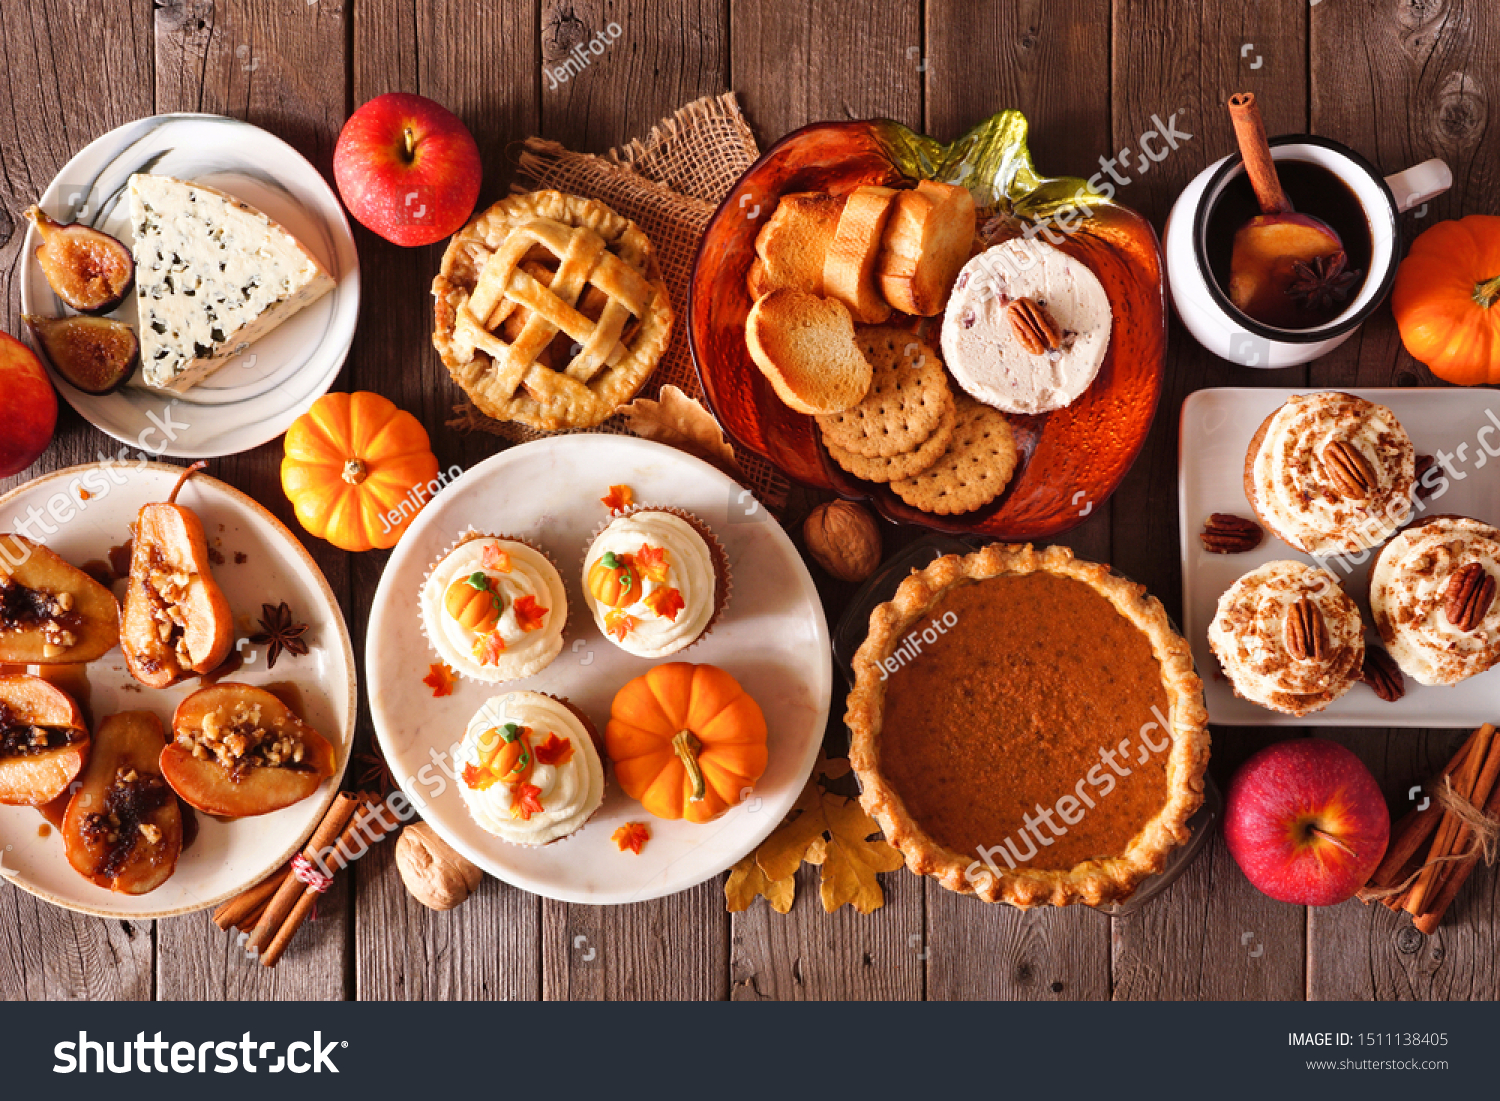 Autumn food concept. Selection of pies, appetizers and desserts. Above view table scene over a rustic wood background. #1511138405